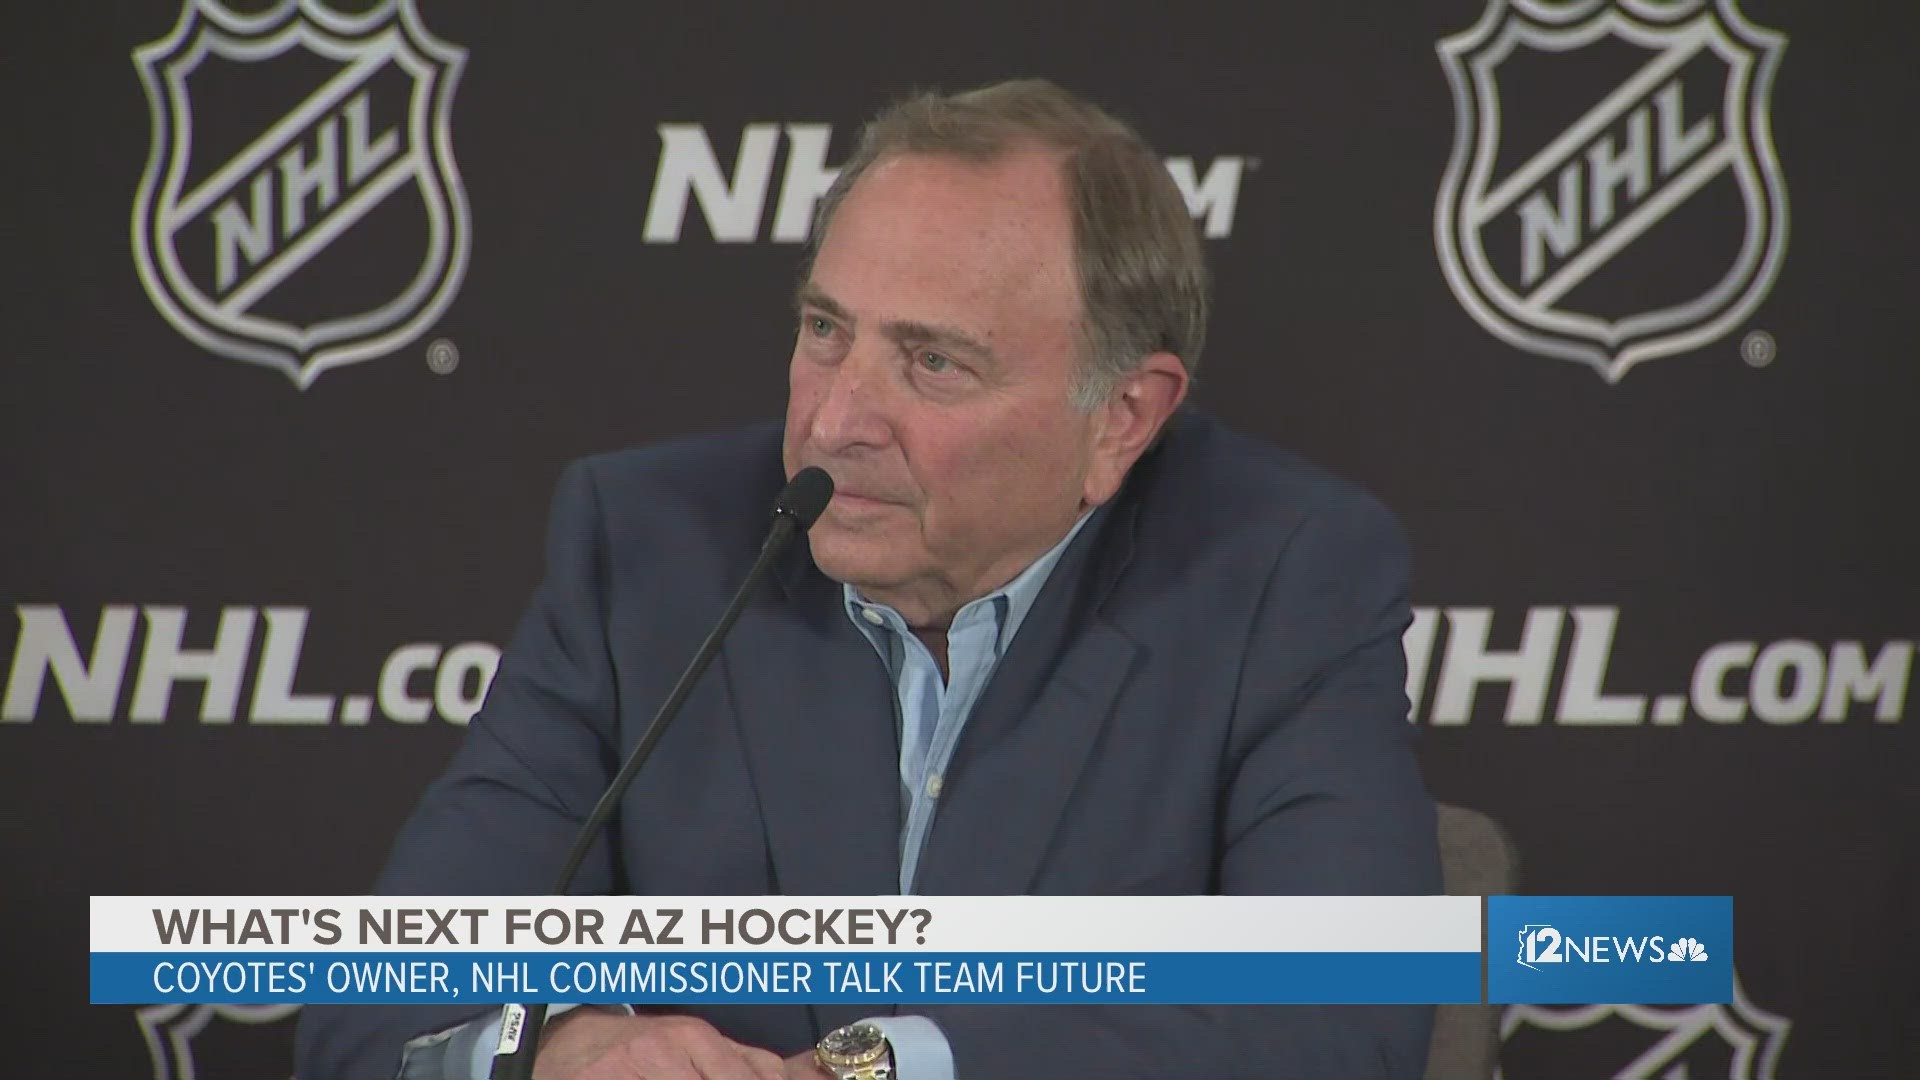 Arizona Coyotes owner Alex Meruelo and NHL Commissioner Gary Bettman discuss the next steps for hockey in Arizona after the team's departure.